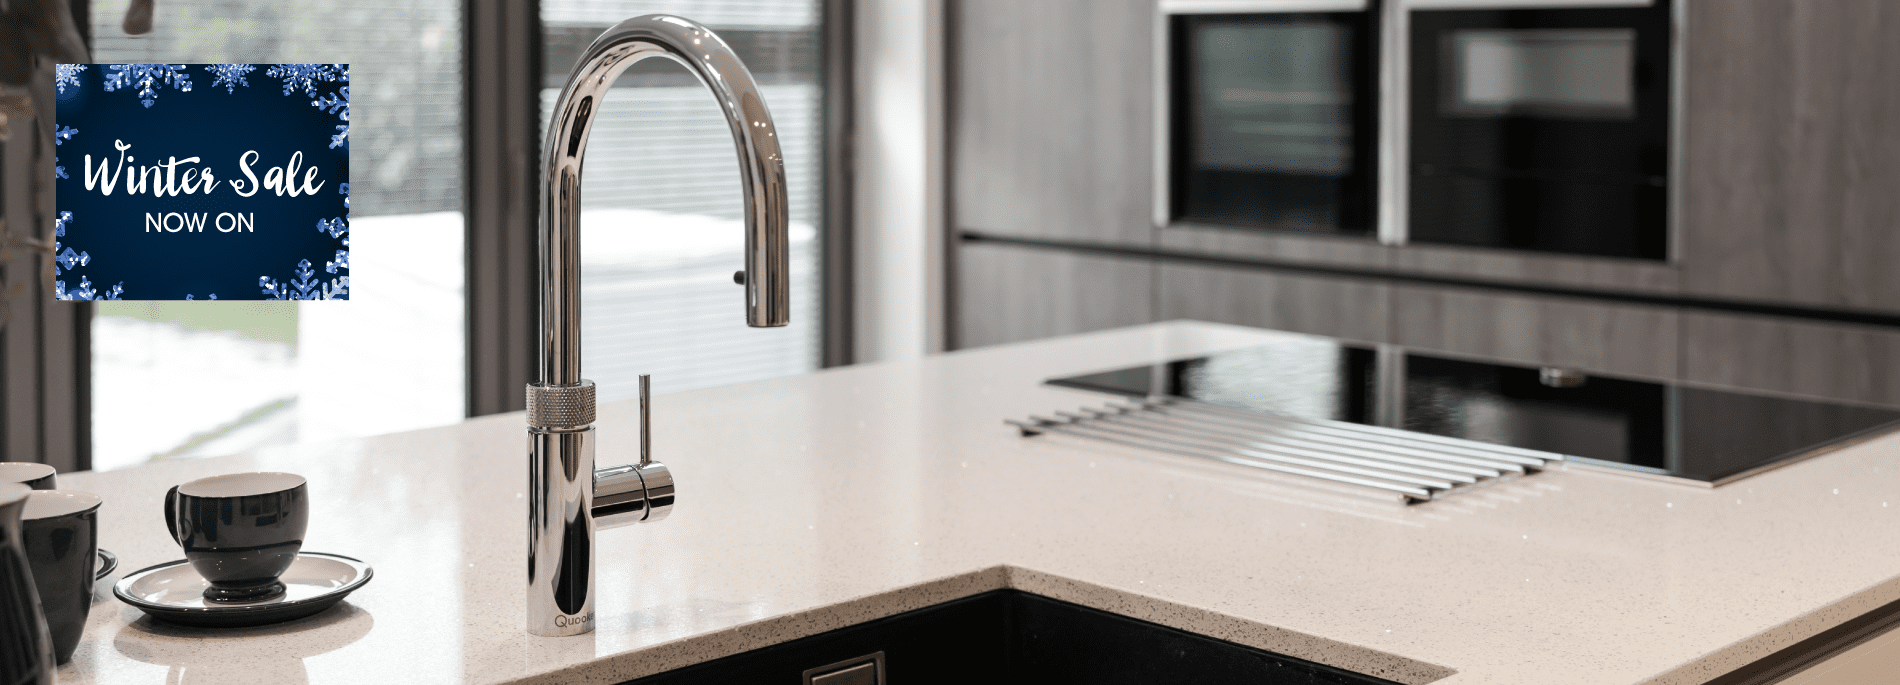 Get a FREE Quooker flex tap for your kitchen, as part of our Winter Sale!